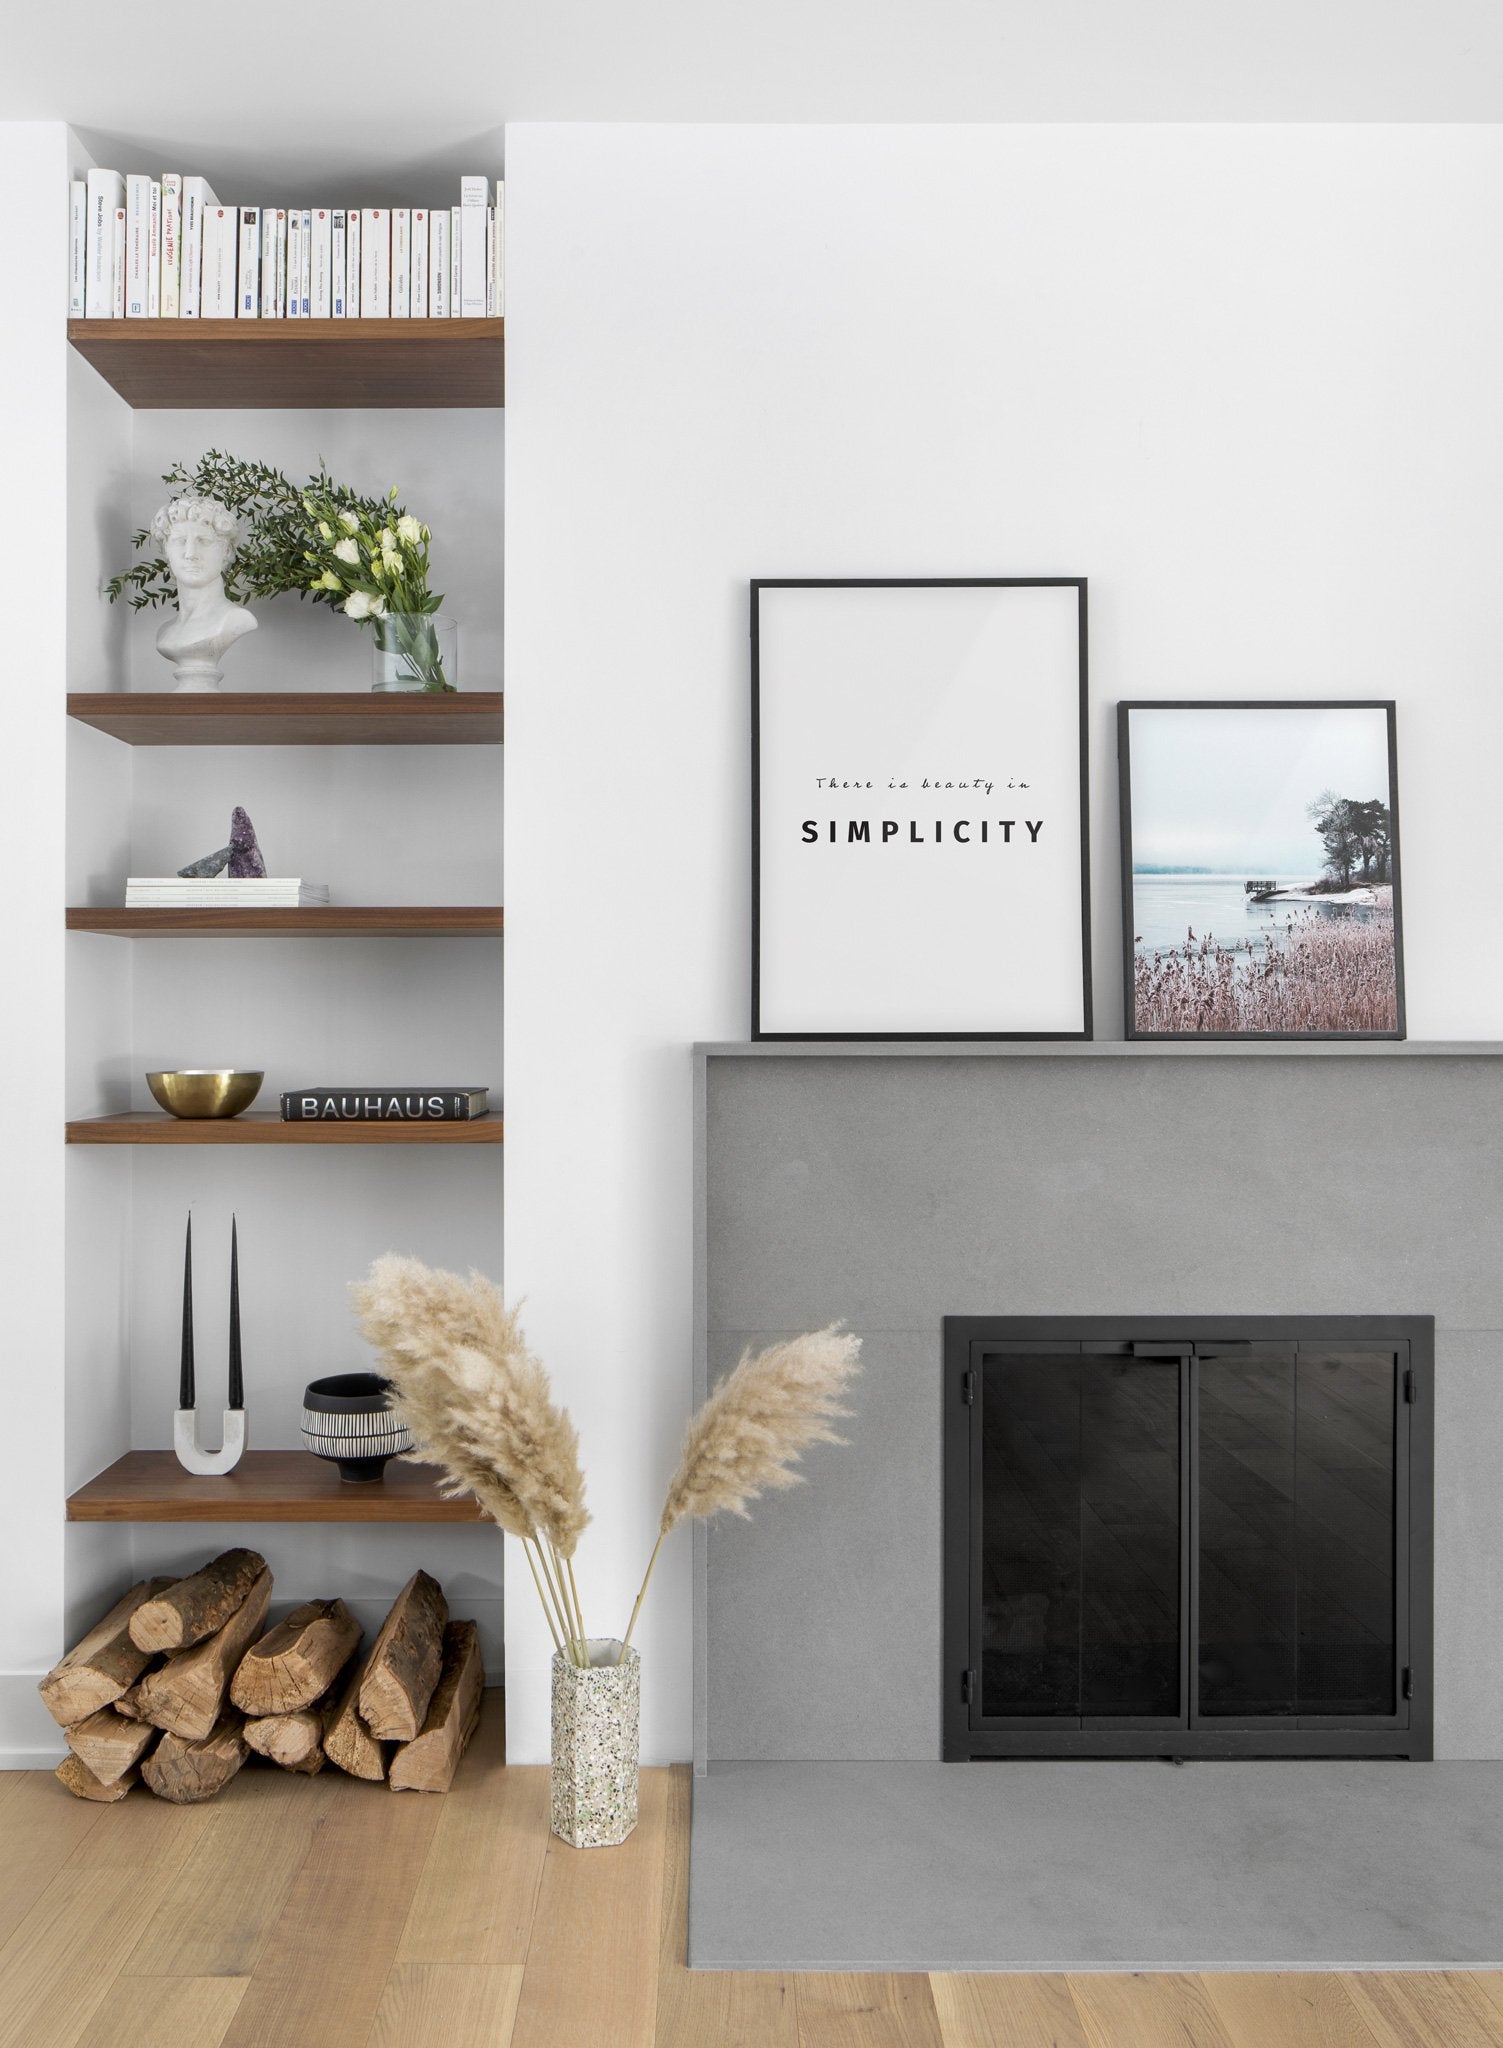 Winter Landscape modern minimalist photography poster by Opposite Wall - Living room with fireplace